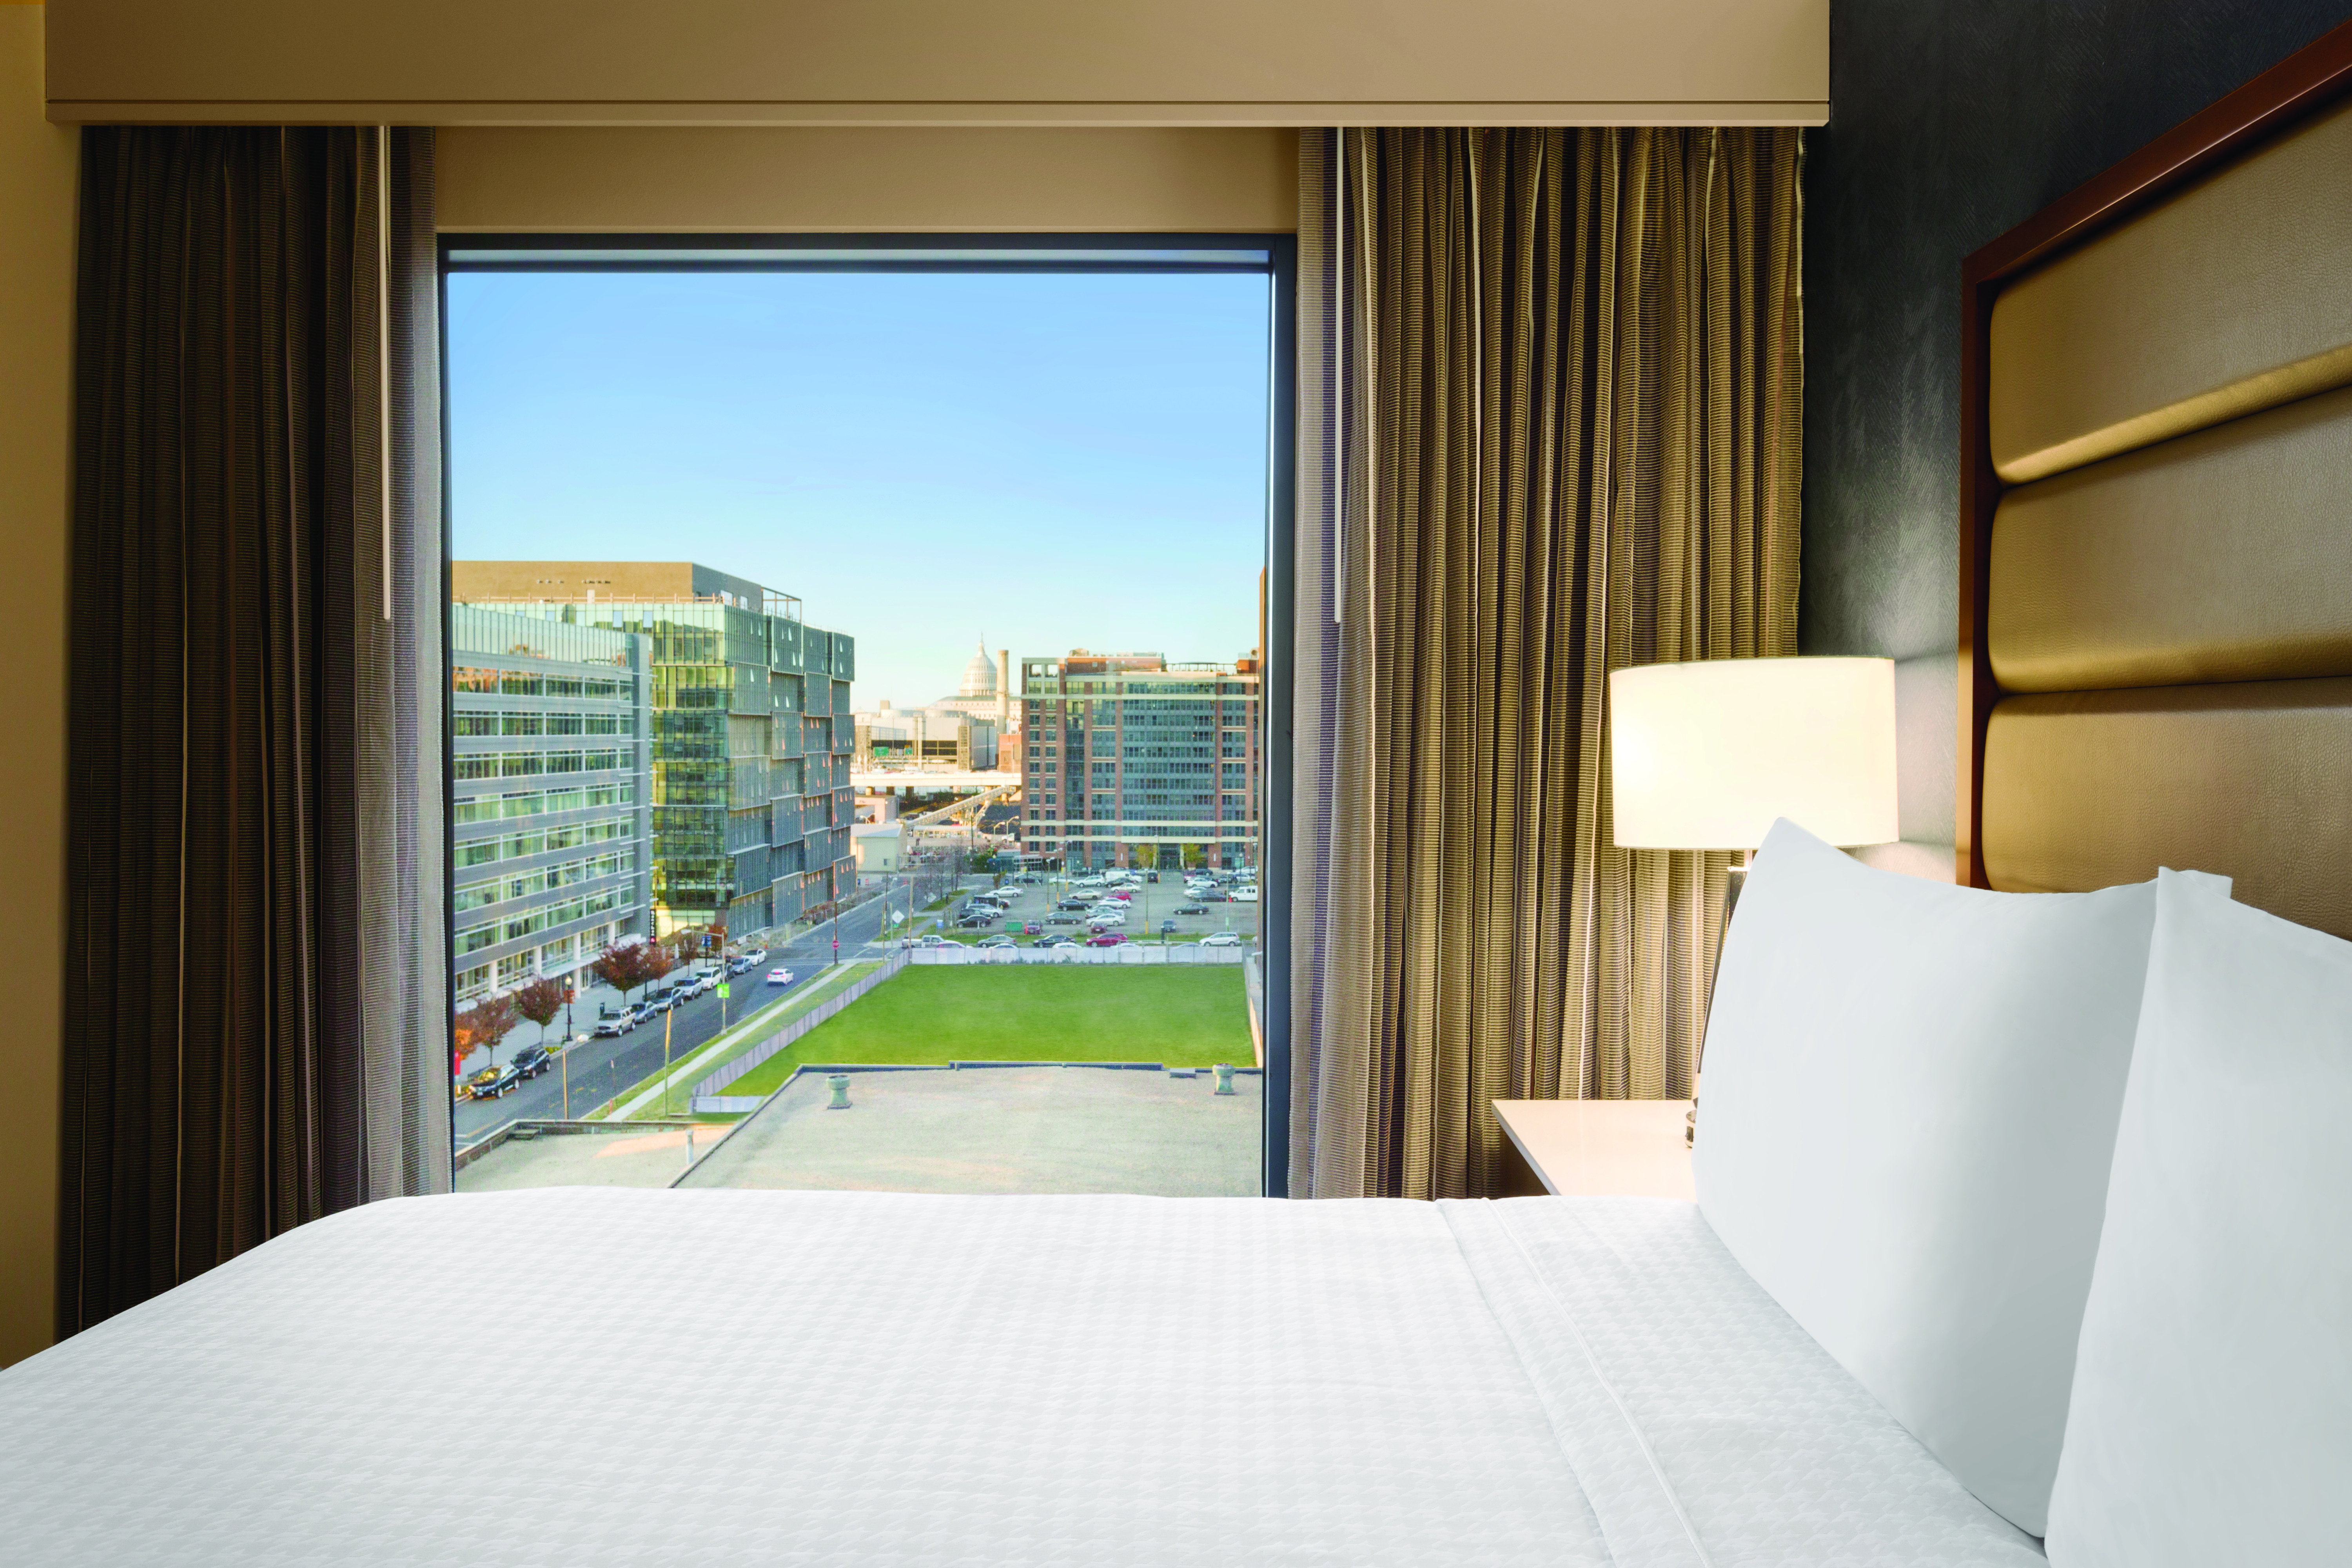 King Bed and Bedside Table with Lamp by Window with Open DrapesKing Mattress Beside a Window with Stunning City Views